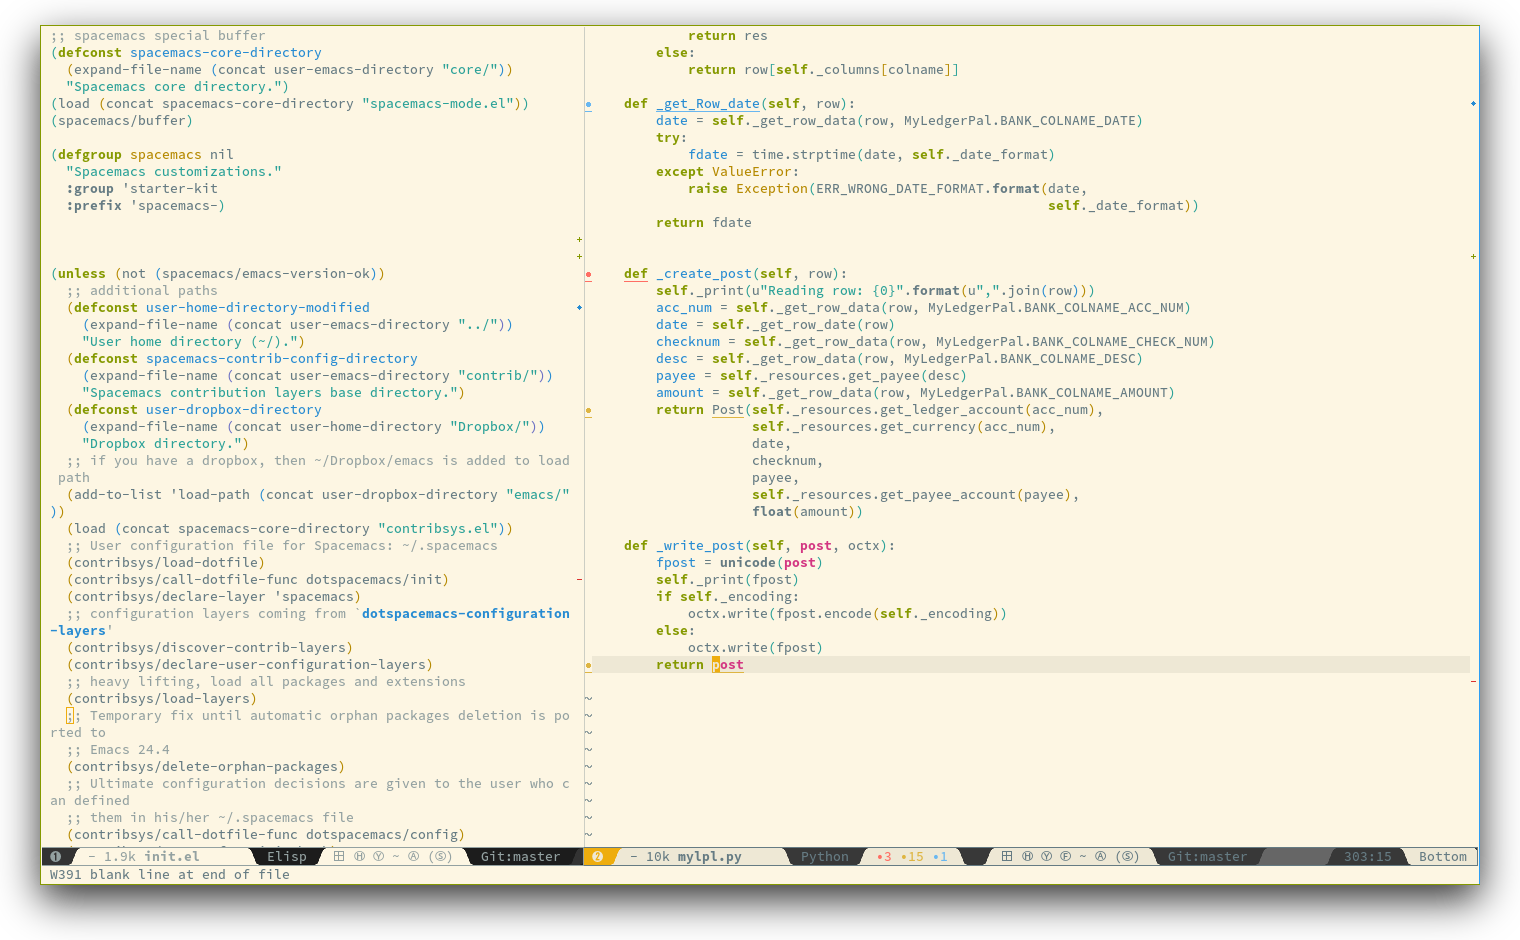 /TakeV/spacemacs/media/commit/34e7454d1190b61bad41c311b63bfb68716a8079/doc/img/spacemacs-python.png